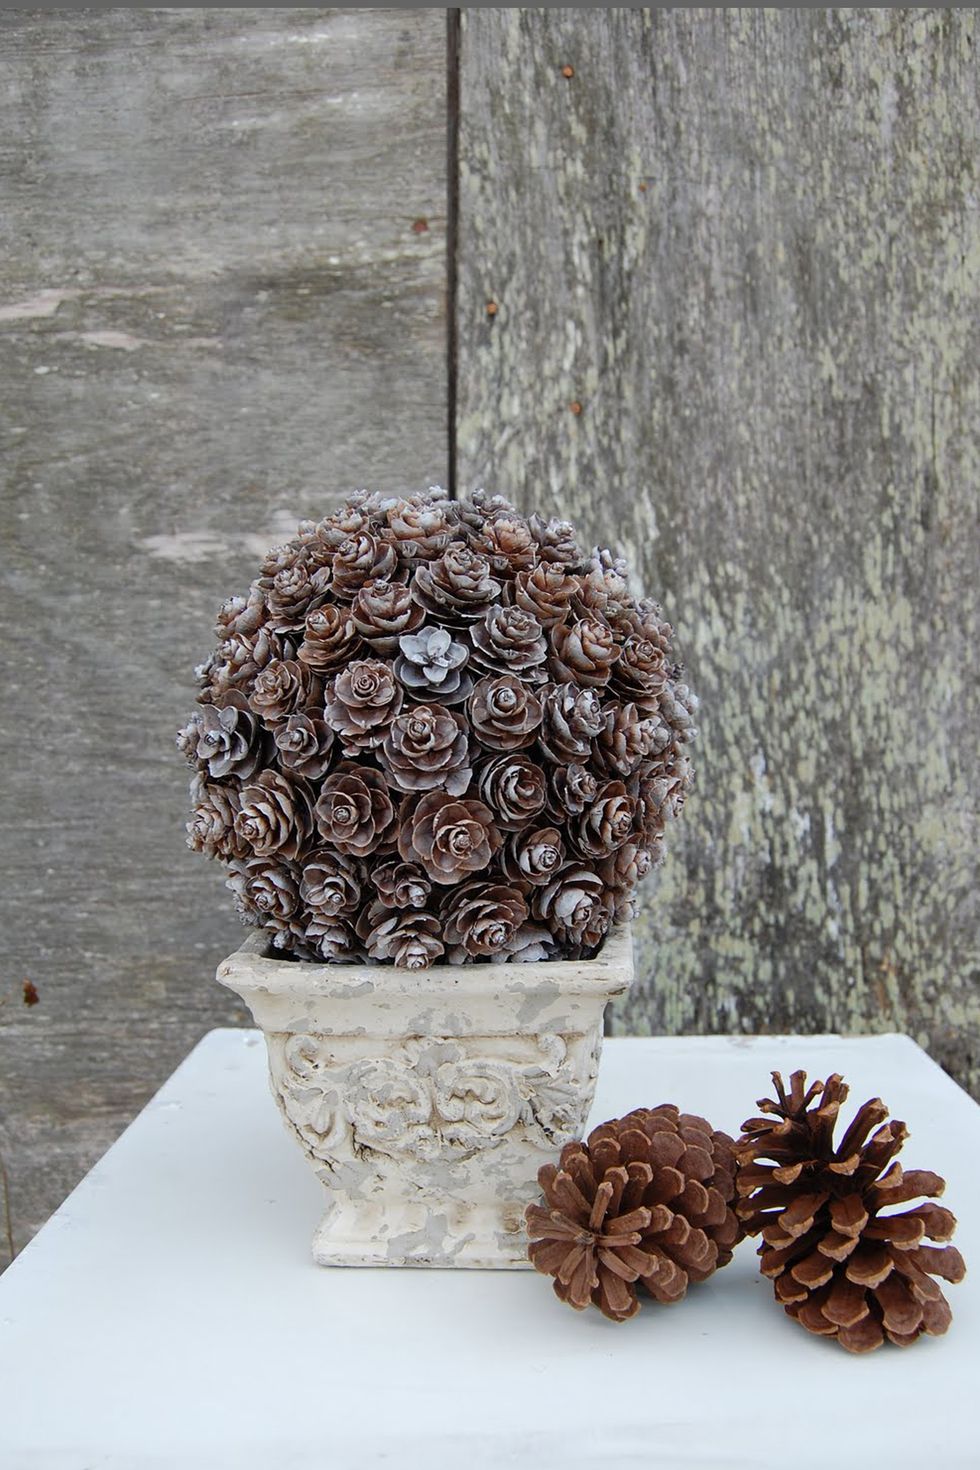 35 pine cone crafts for Christmas - Gathered